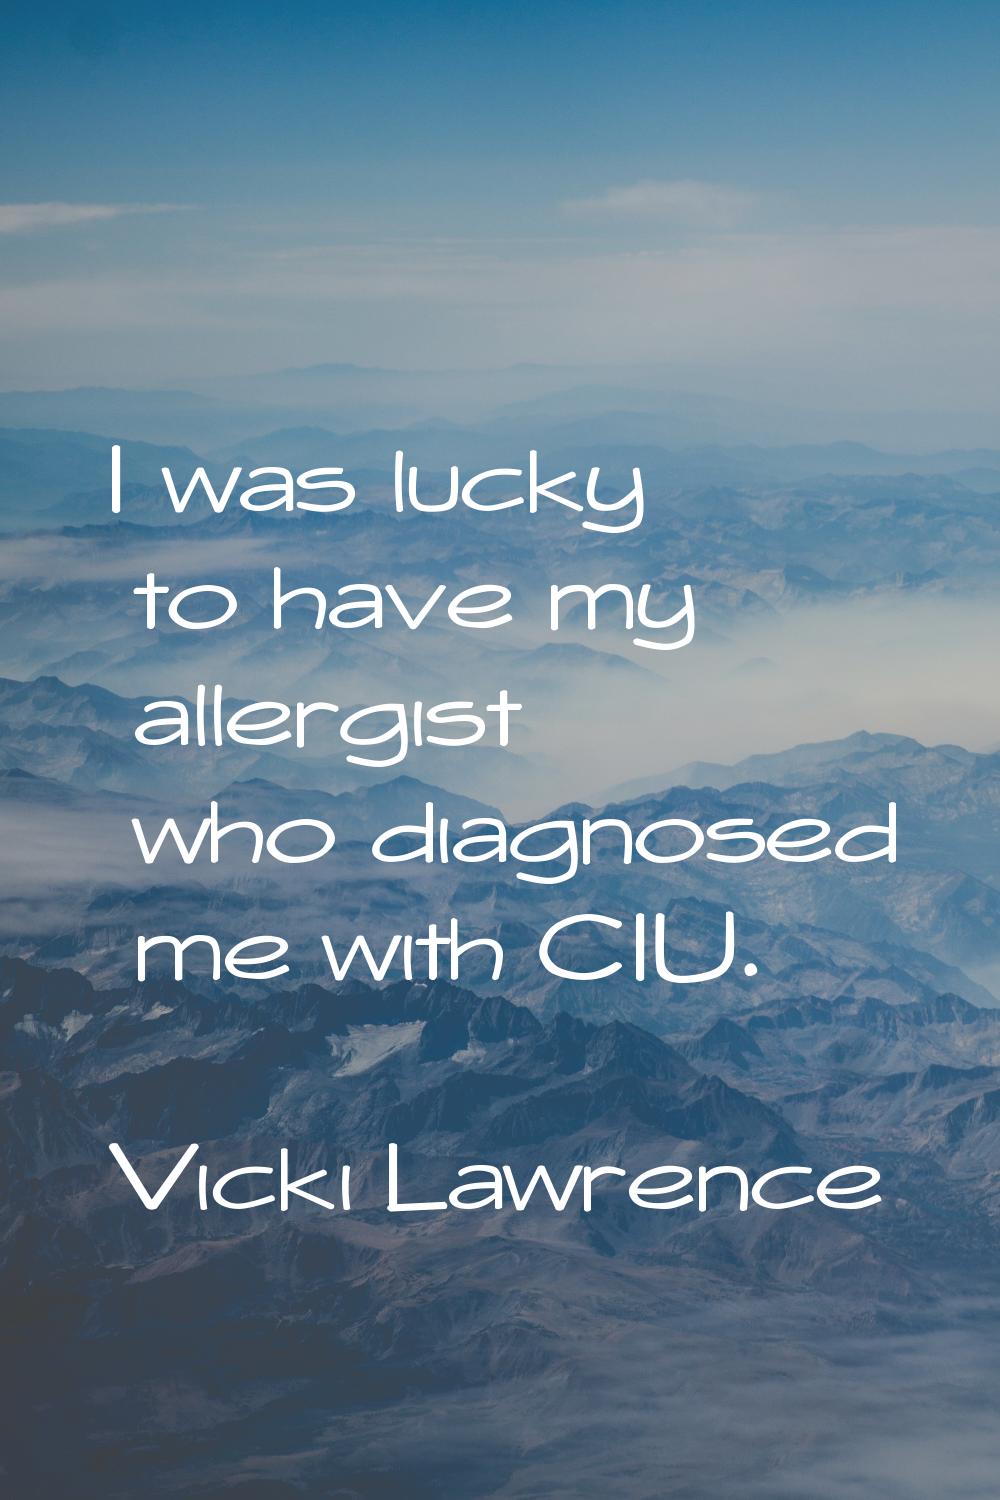 I was lucky to have my allergist who diagnosed me with CIU.